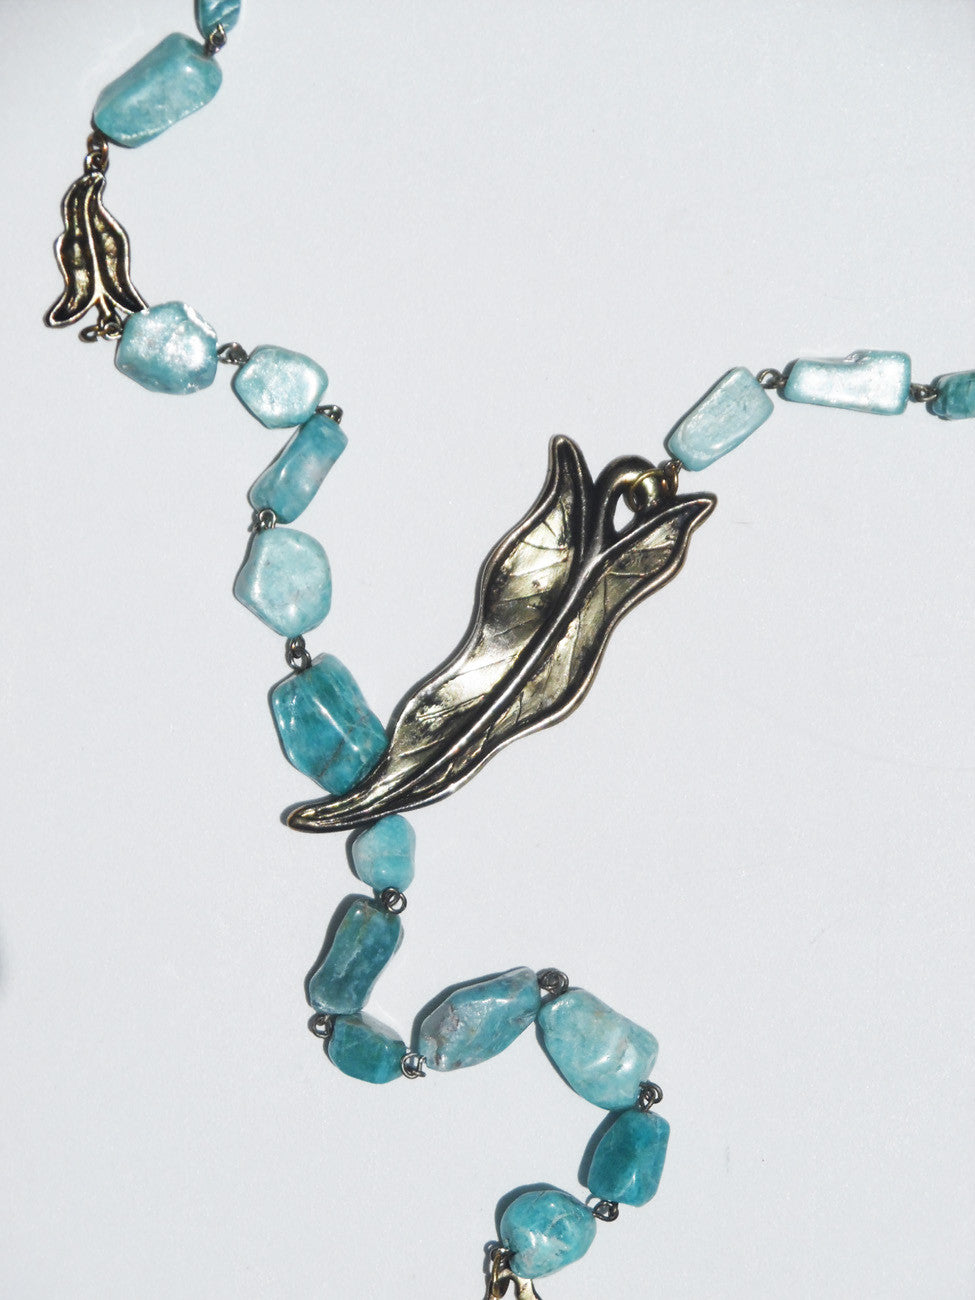 Necklace Or Chain Belt Amazonite With Leaf